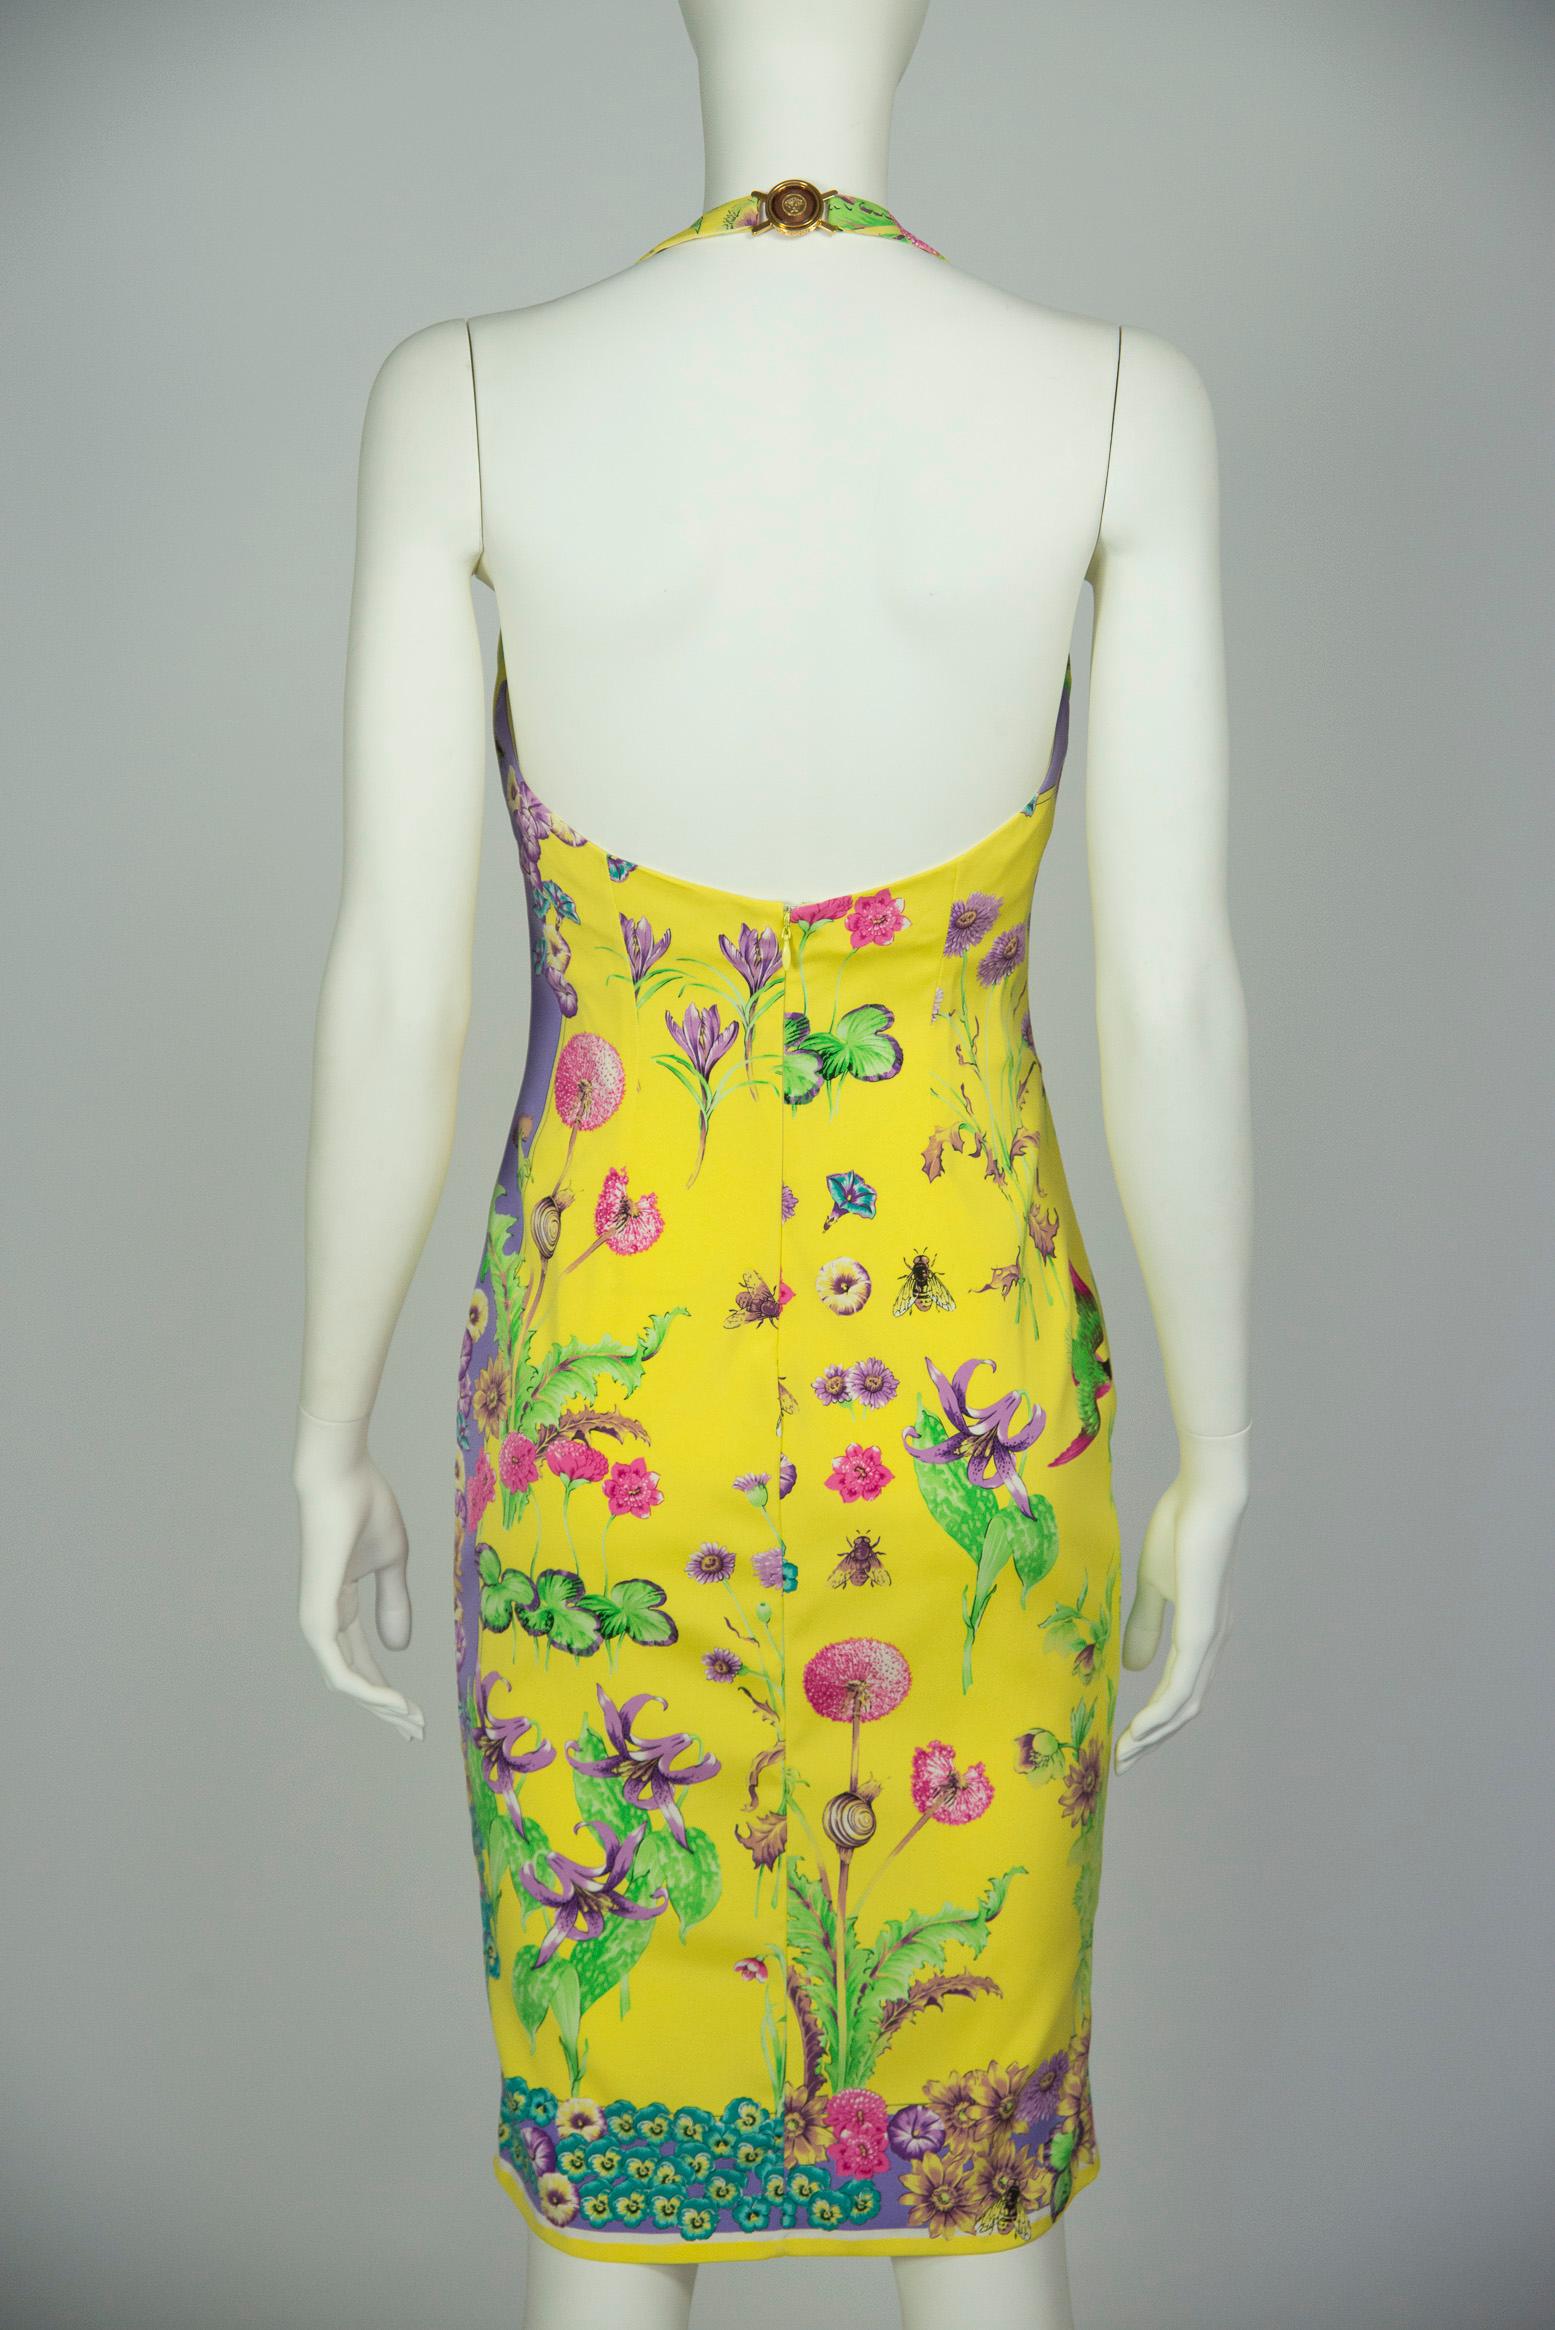 Gianni Versace Couture Printed Halterneck Dress, Circa 1995-1996 For Sale 9